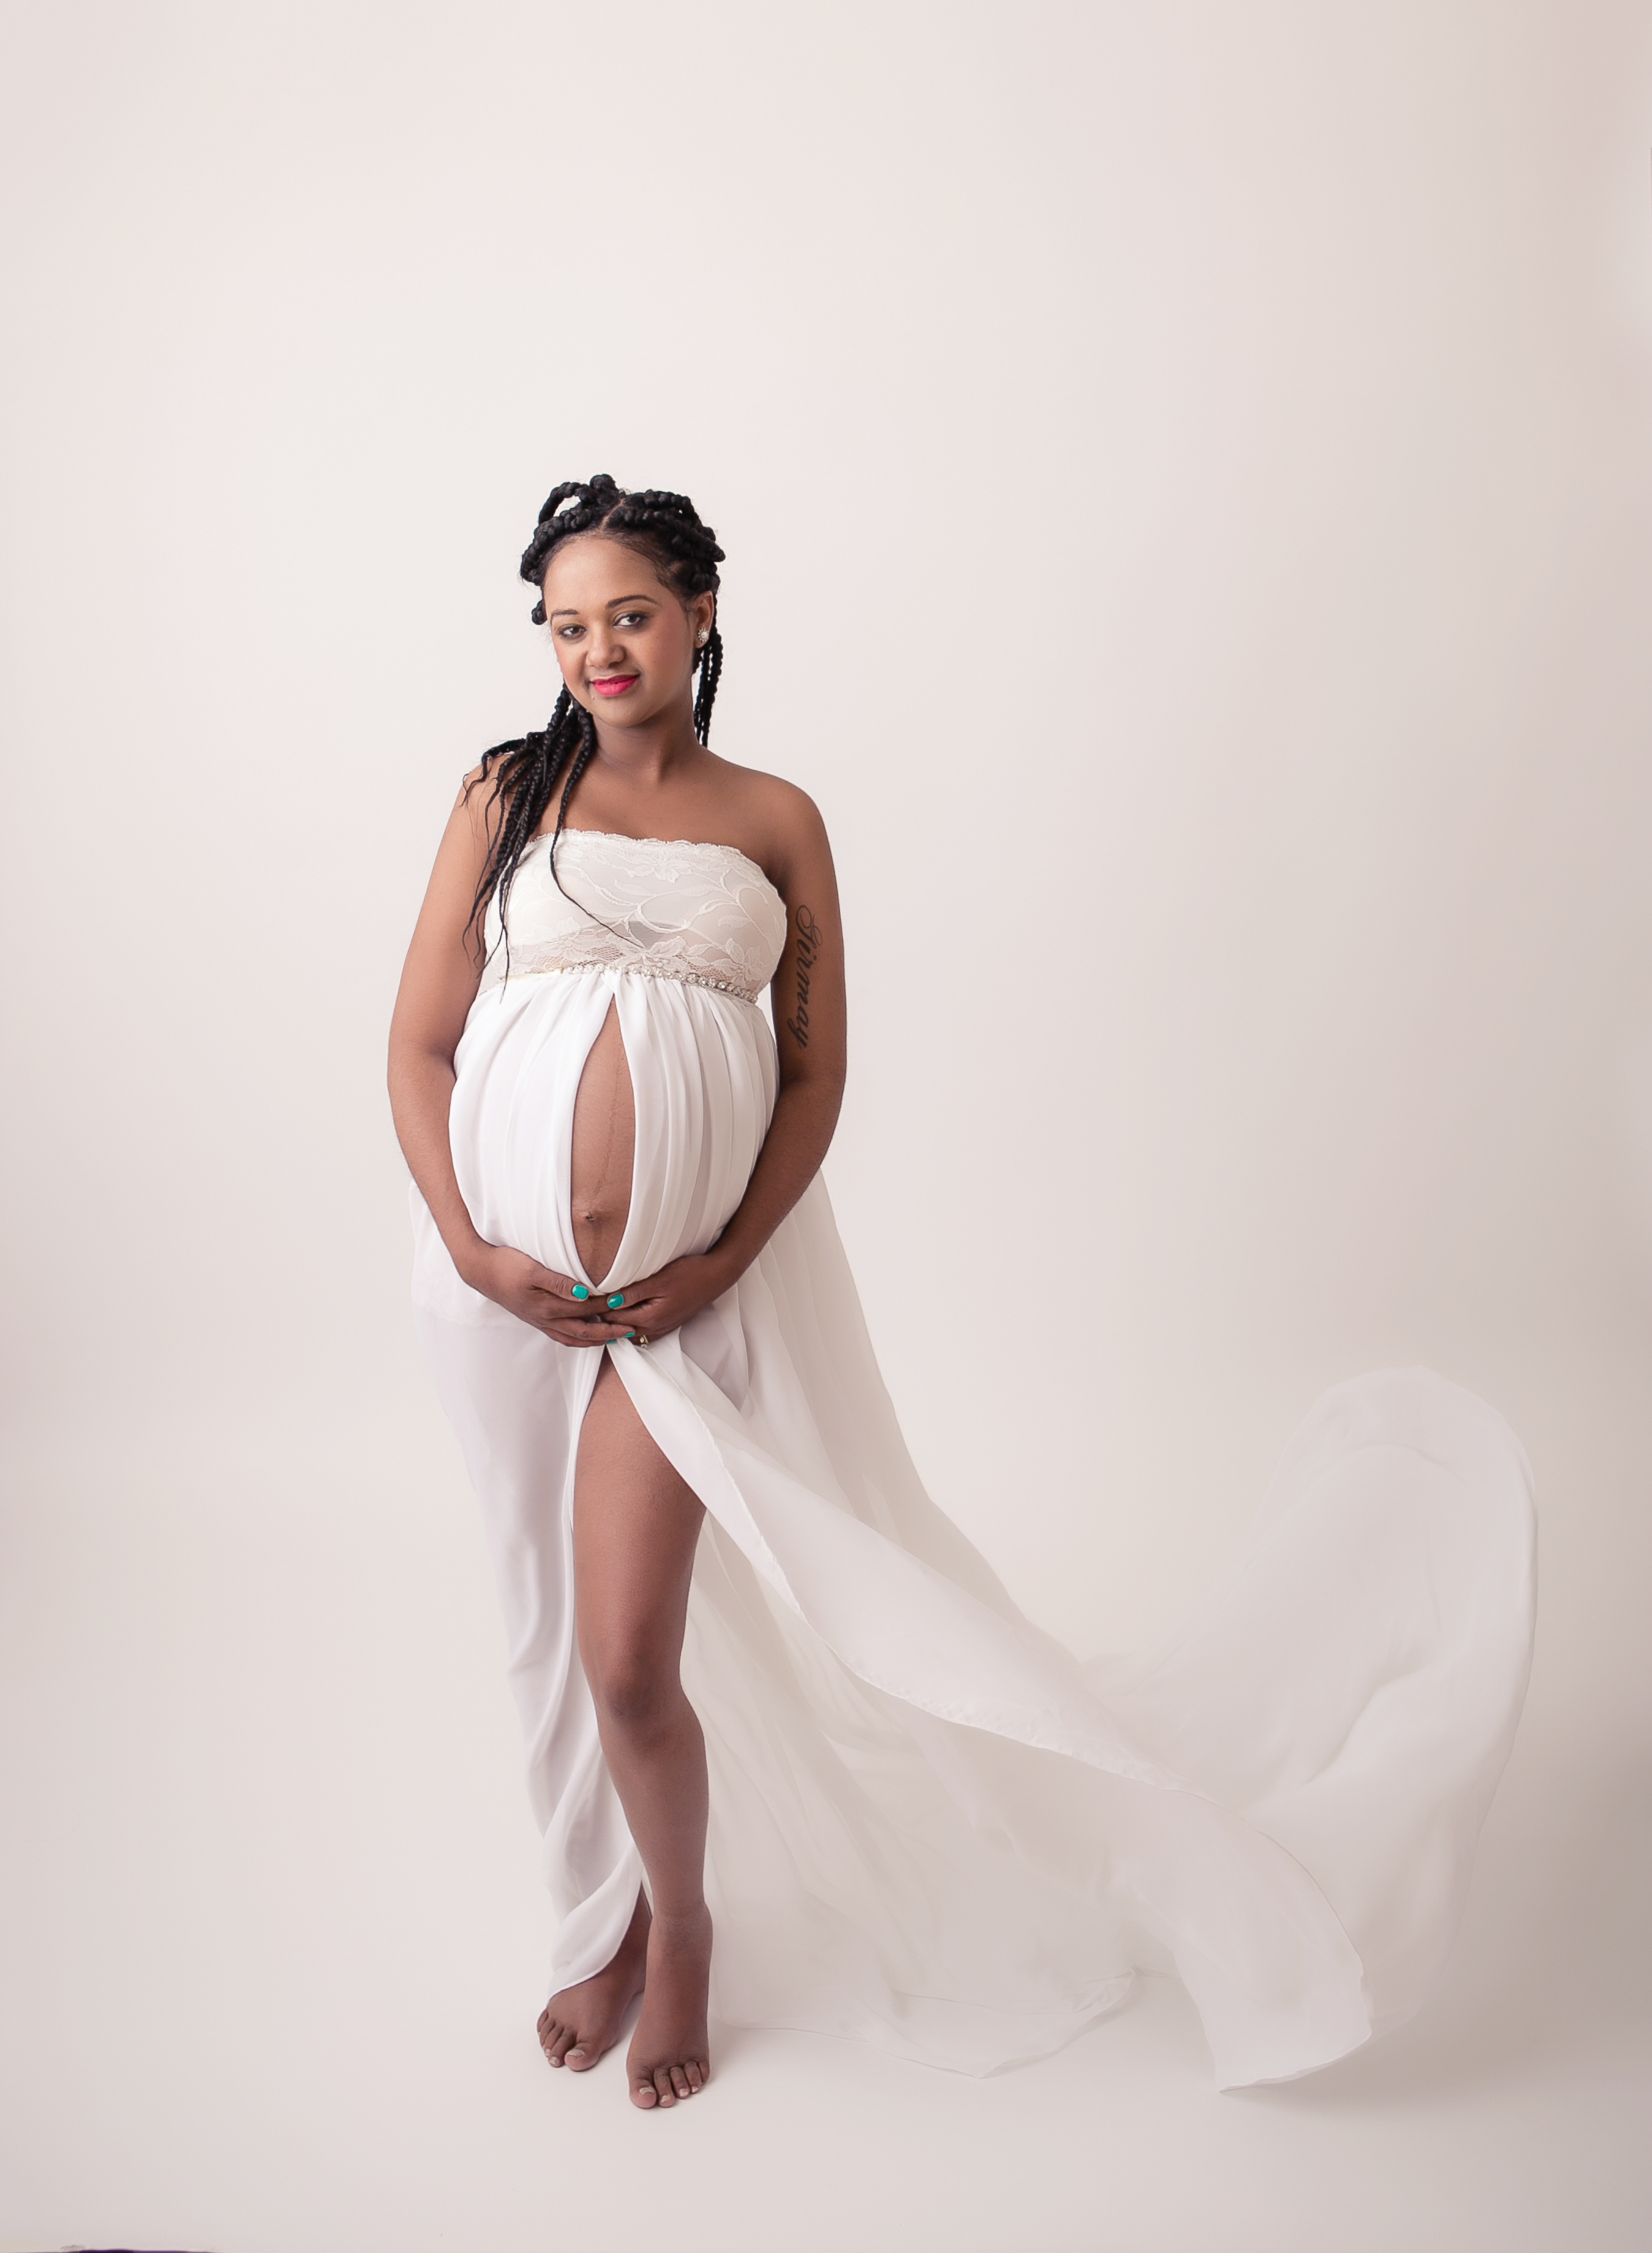 Studio maternity portrait on a light background with the pregnant black mother in a white dress holding around her expectant belly and smiling at the camera. Image by Helga Himer Photography, Sudbury, Ontario.